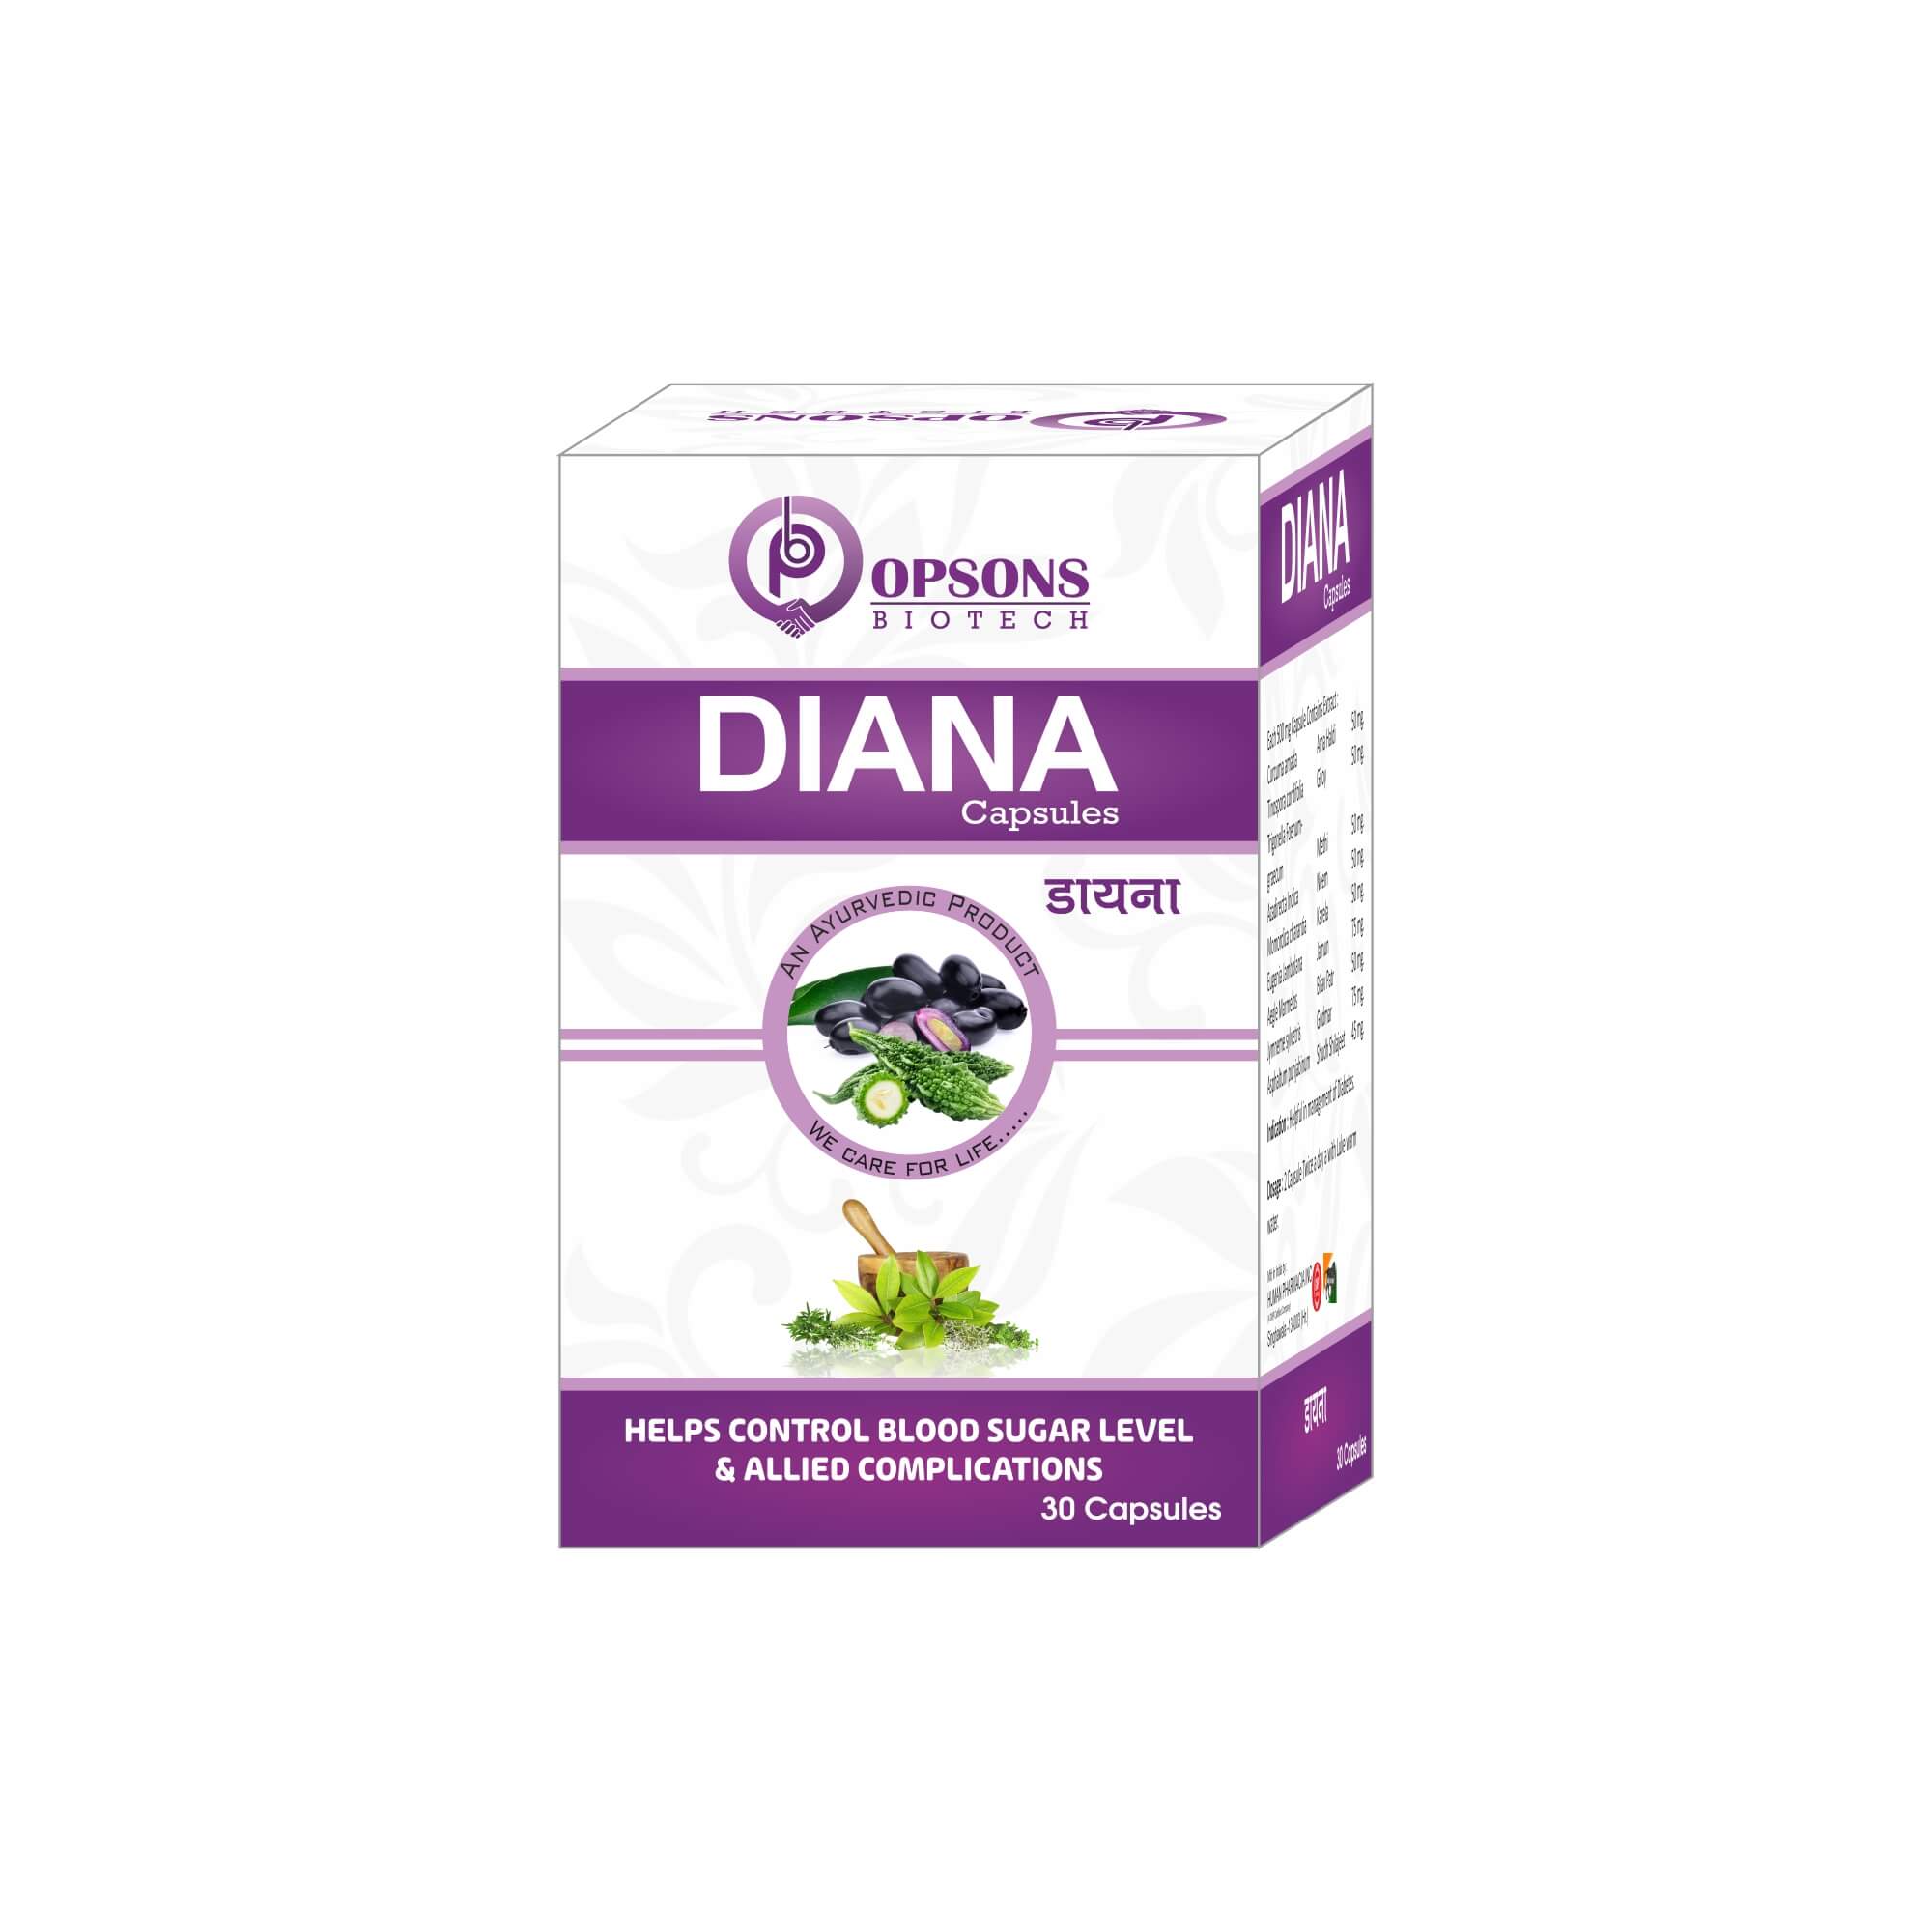 Product Name: DIANA, Compositions of Helps Control Blood Sugar Level & Allied Complications are Helps Control Blood Sugar Level & Allied Complications - Opsons Biotech